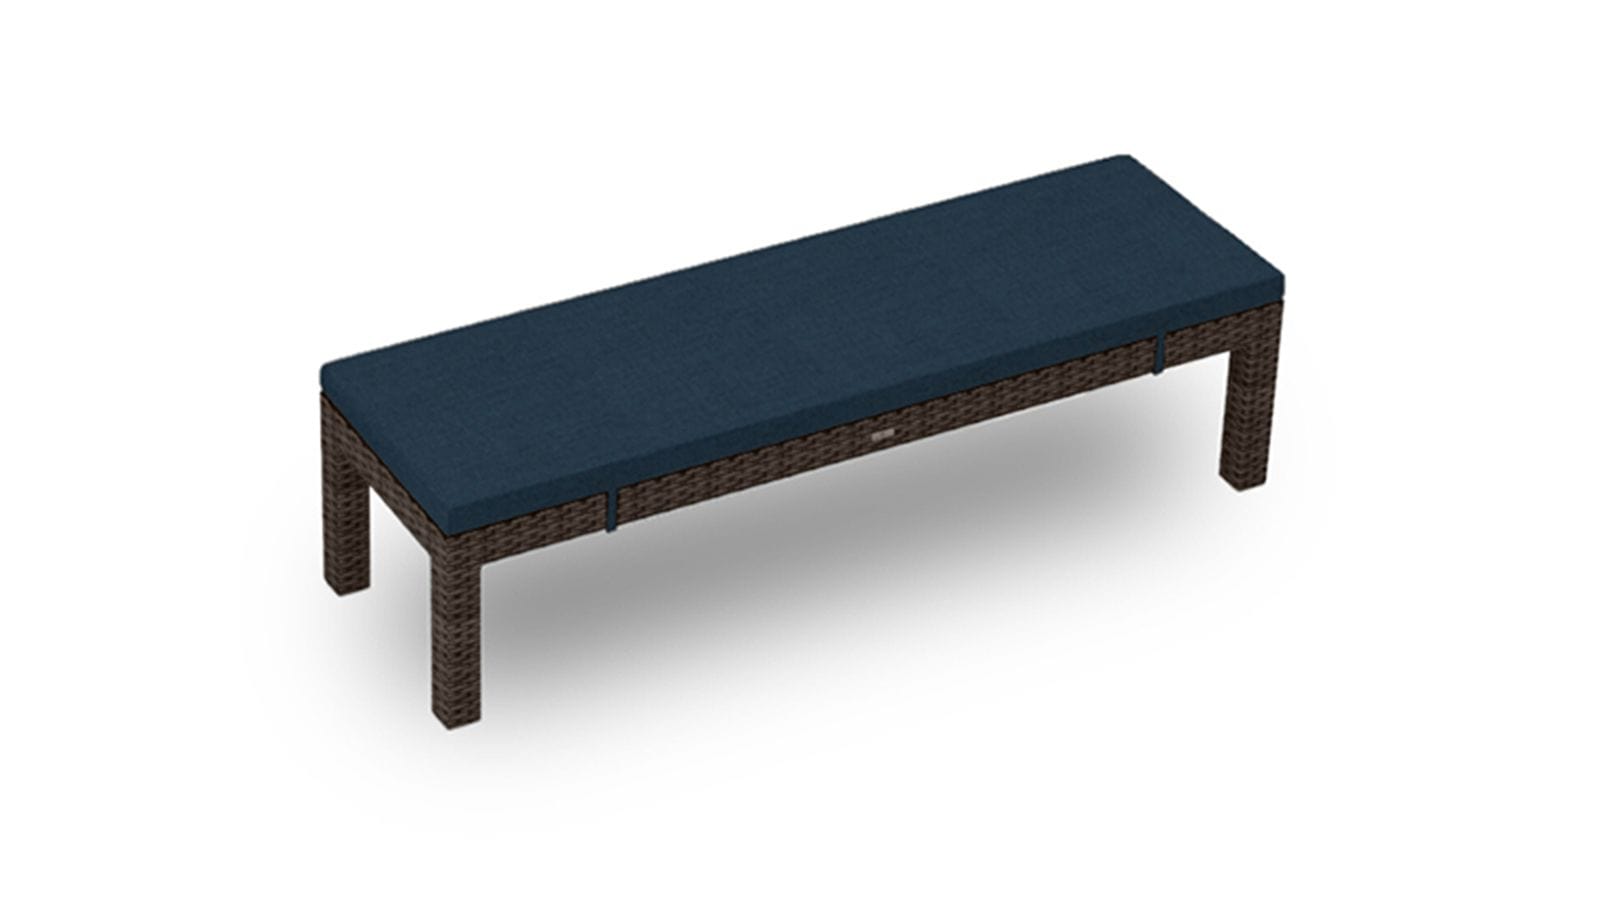 Harmonia Living Outdoor Dining Chair Harmonia Living - Arden 3-Seater Dining Bench | HL-ARD-CH-3DB